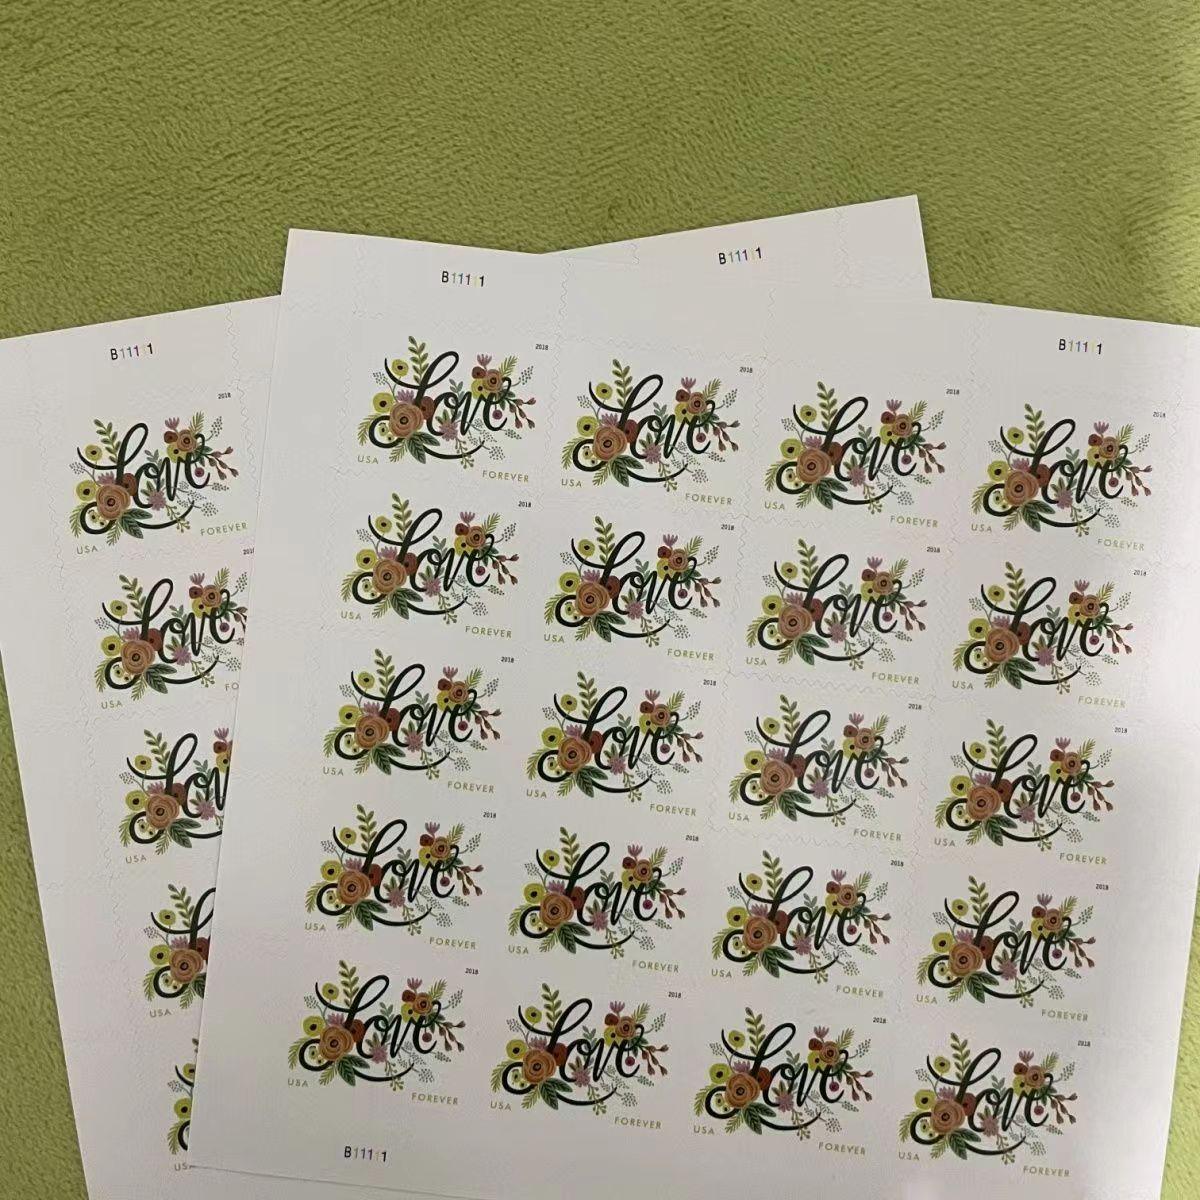 A booklet of Mountain Flora 2022 postage stamps featuring four varieties of colorful mountain flora arranged in uniform rows. Each stamp is labeled with the flower's name and denomination.